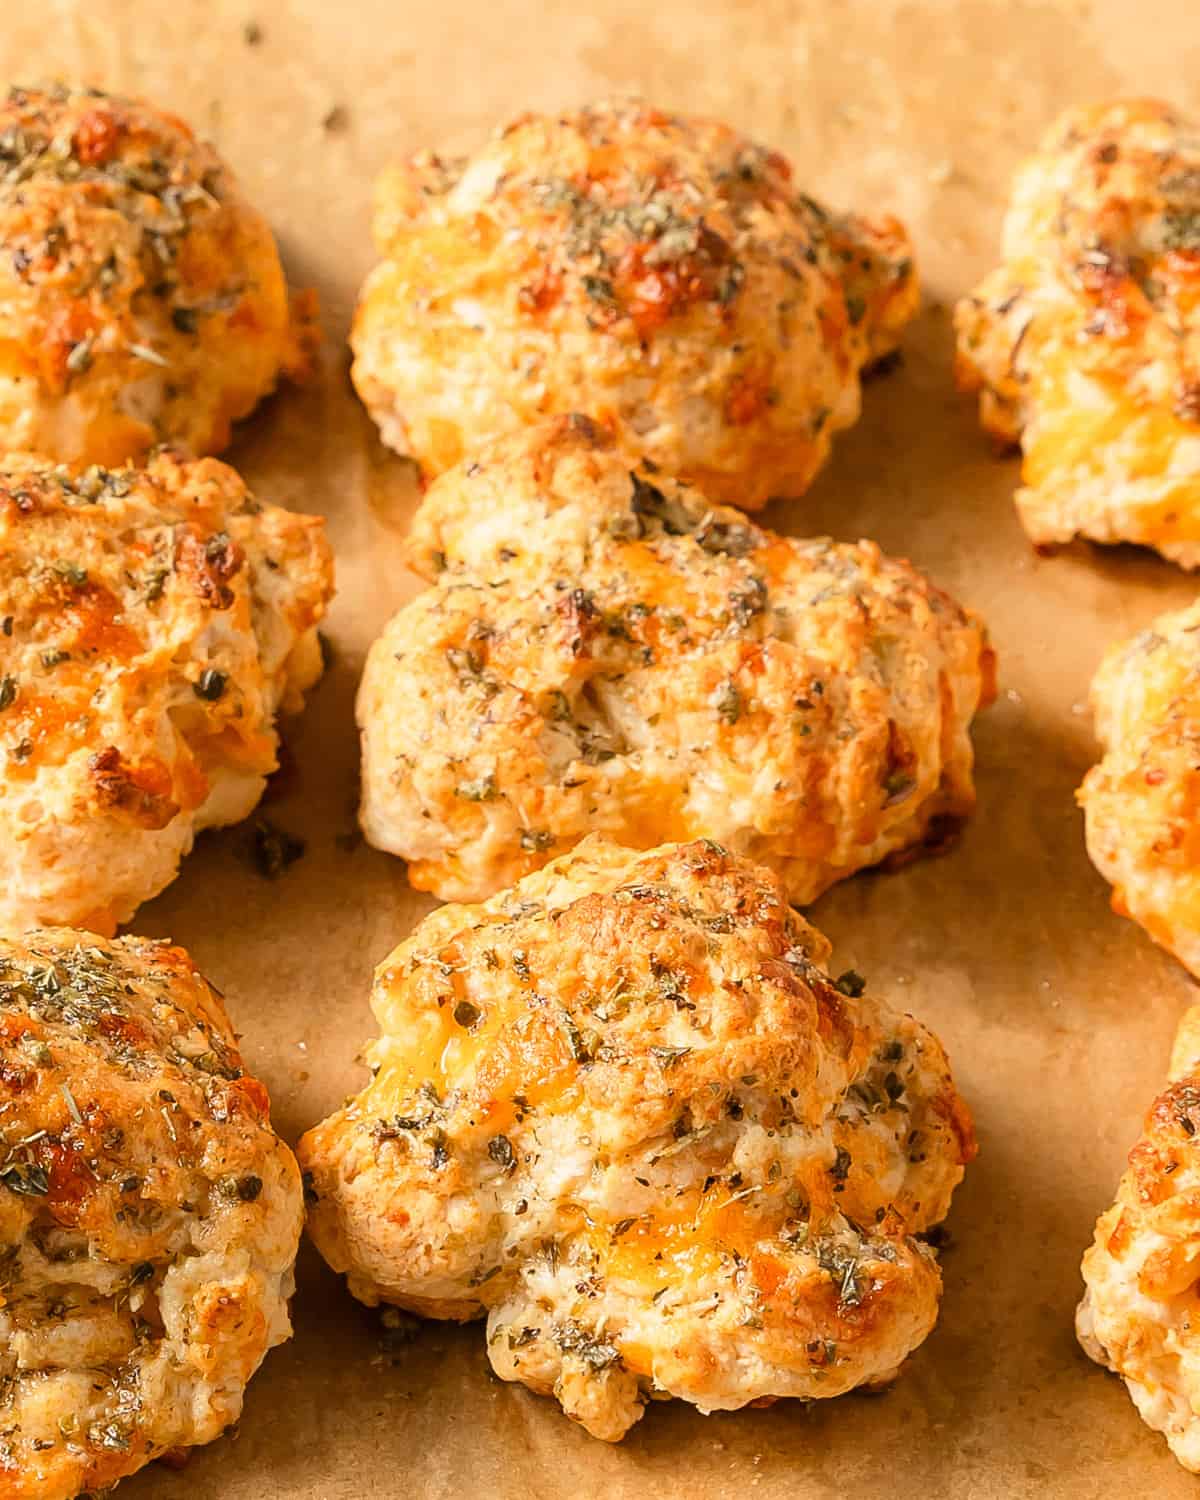 Bisquick cheddar biscuits are buttery and flaky cheddar biscuits topped with an herby garlic butter sauce. This cheddar bay biscuit copycat recipe is quick and easy to make using 6 simple pantry ingredients. These garlic cheddar Bisquick drop biscuits are just as good, if not better than the ones you’ll find at Red Lobster.